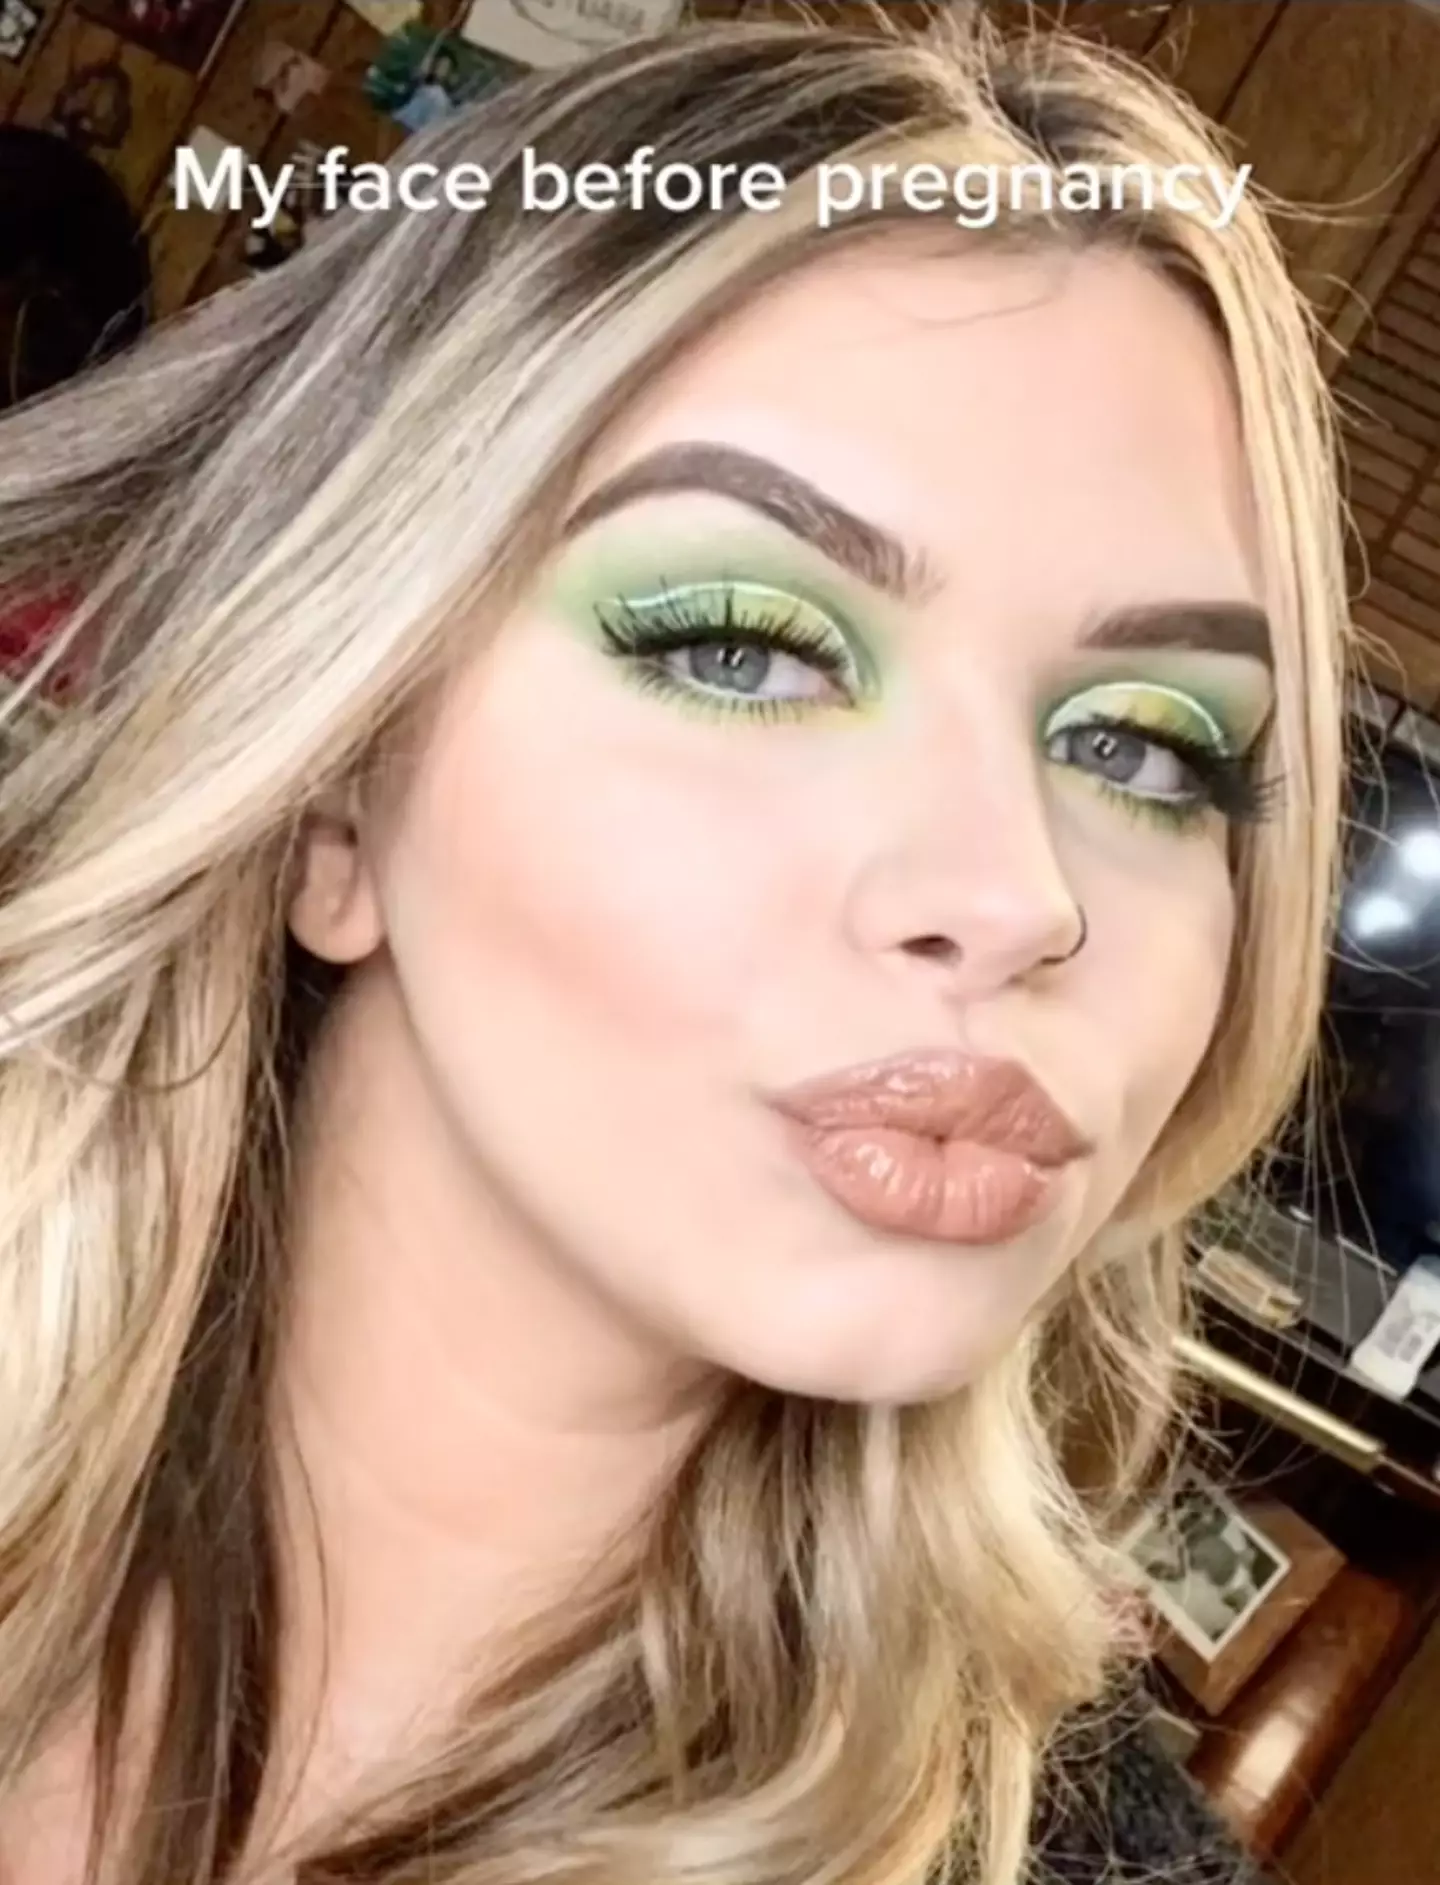 This TikTok creator shocked fans when she revealed how her face changed. (